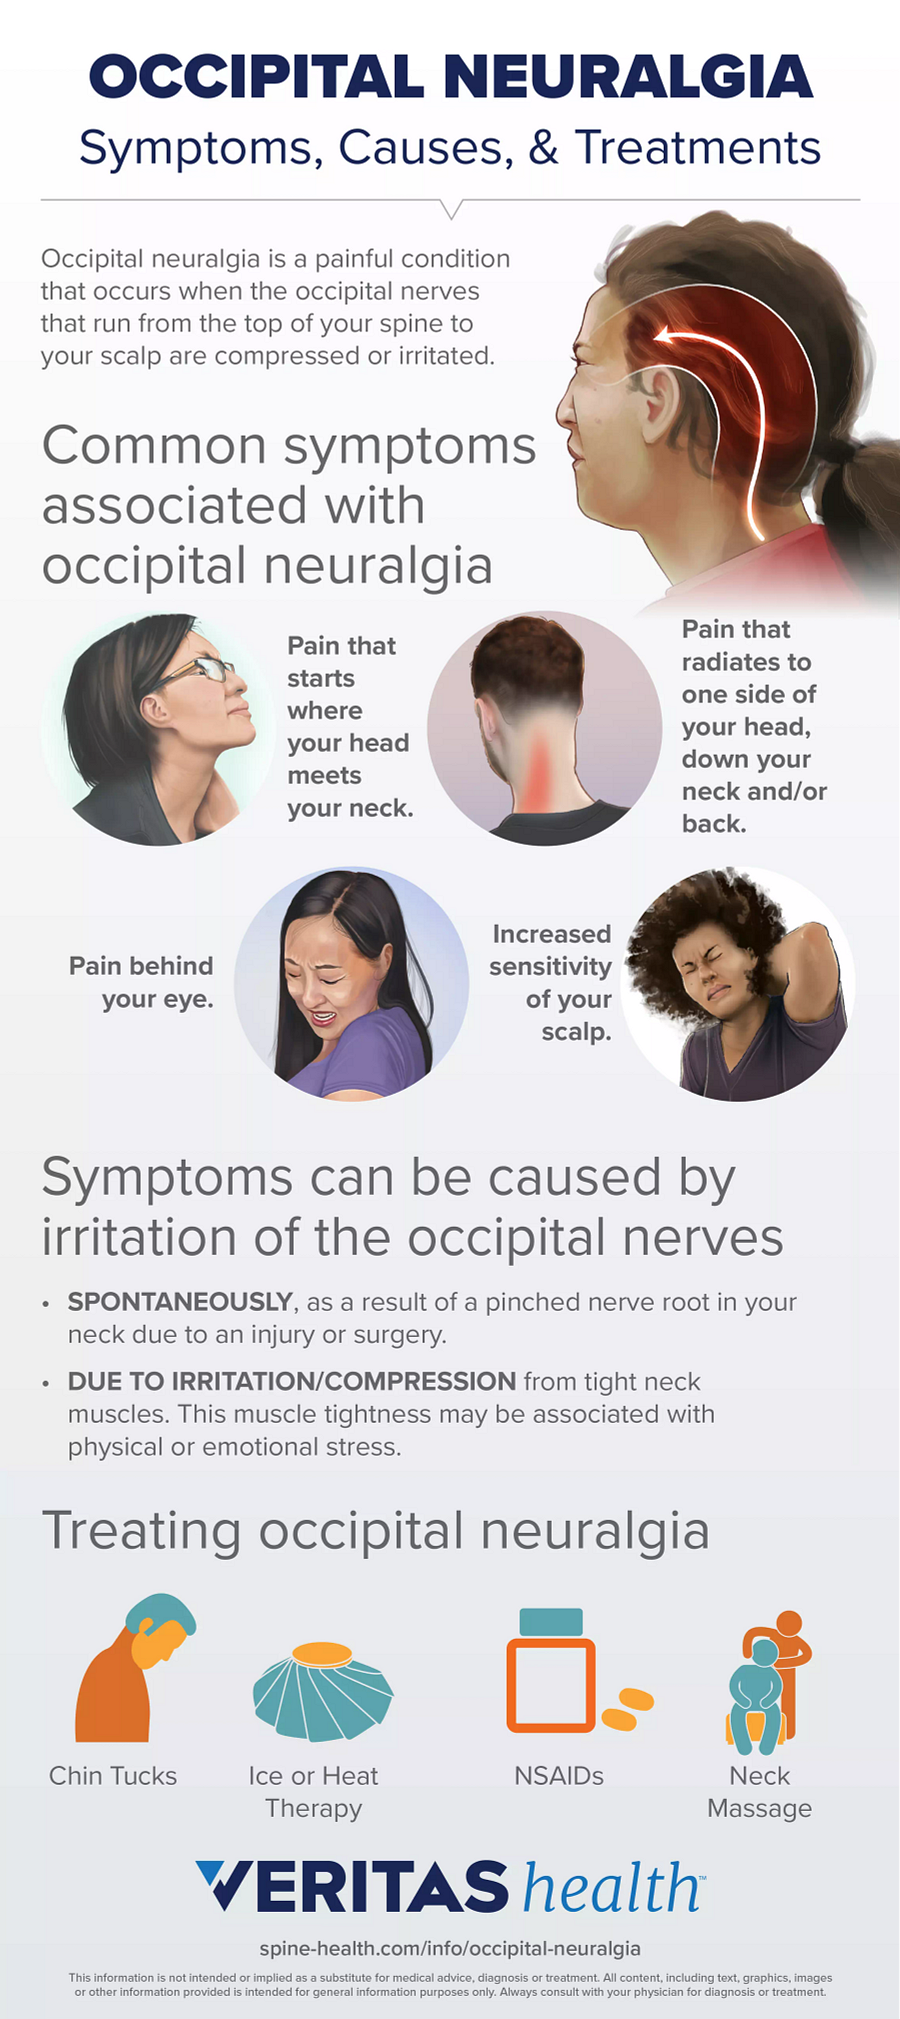 Occipital Neuralgia: What It Is and How to Treat | Spine-health